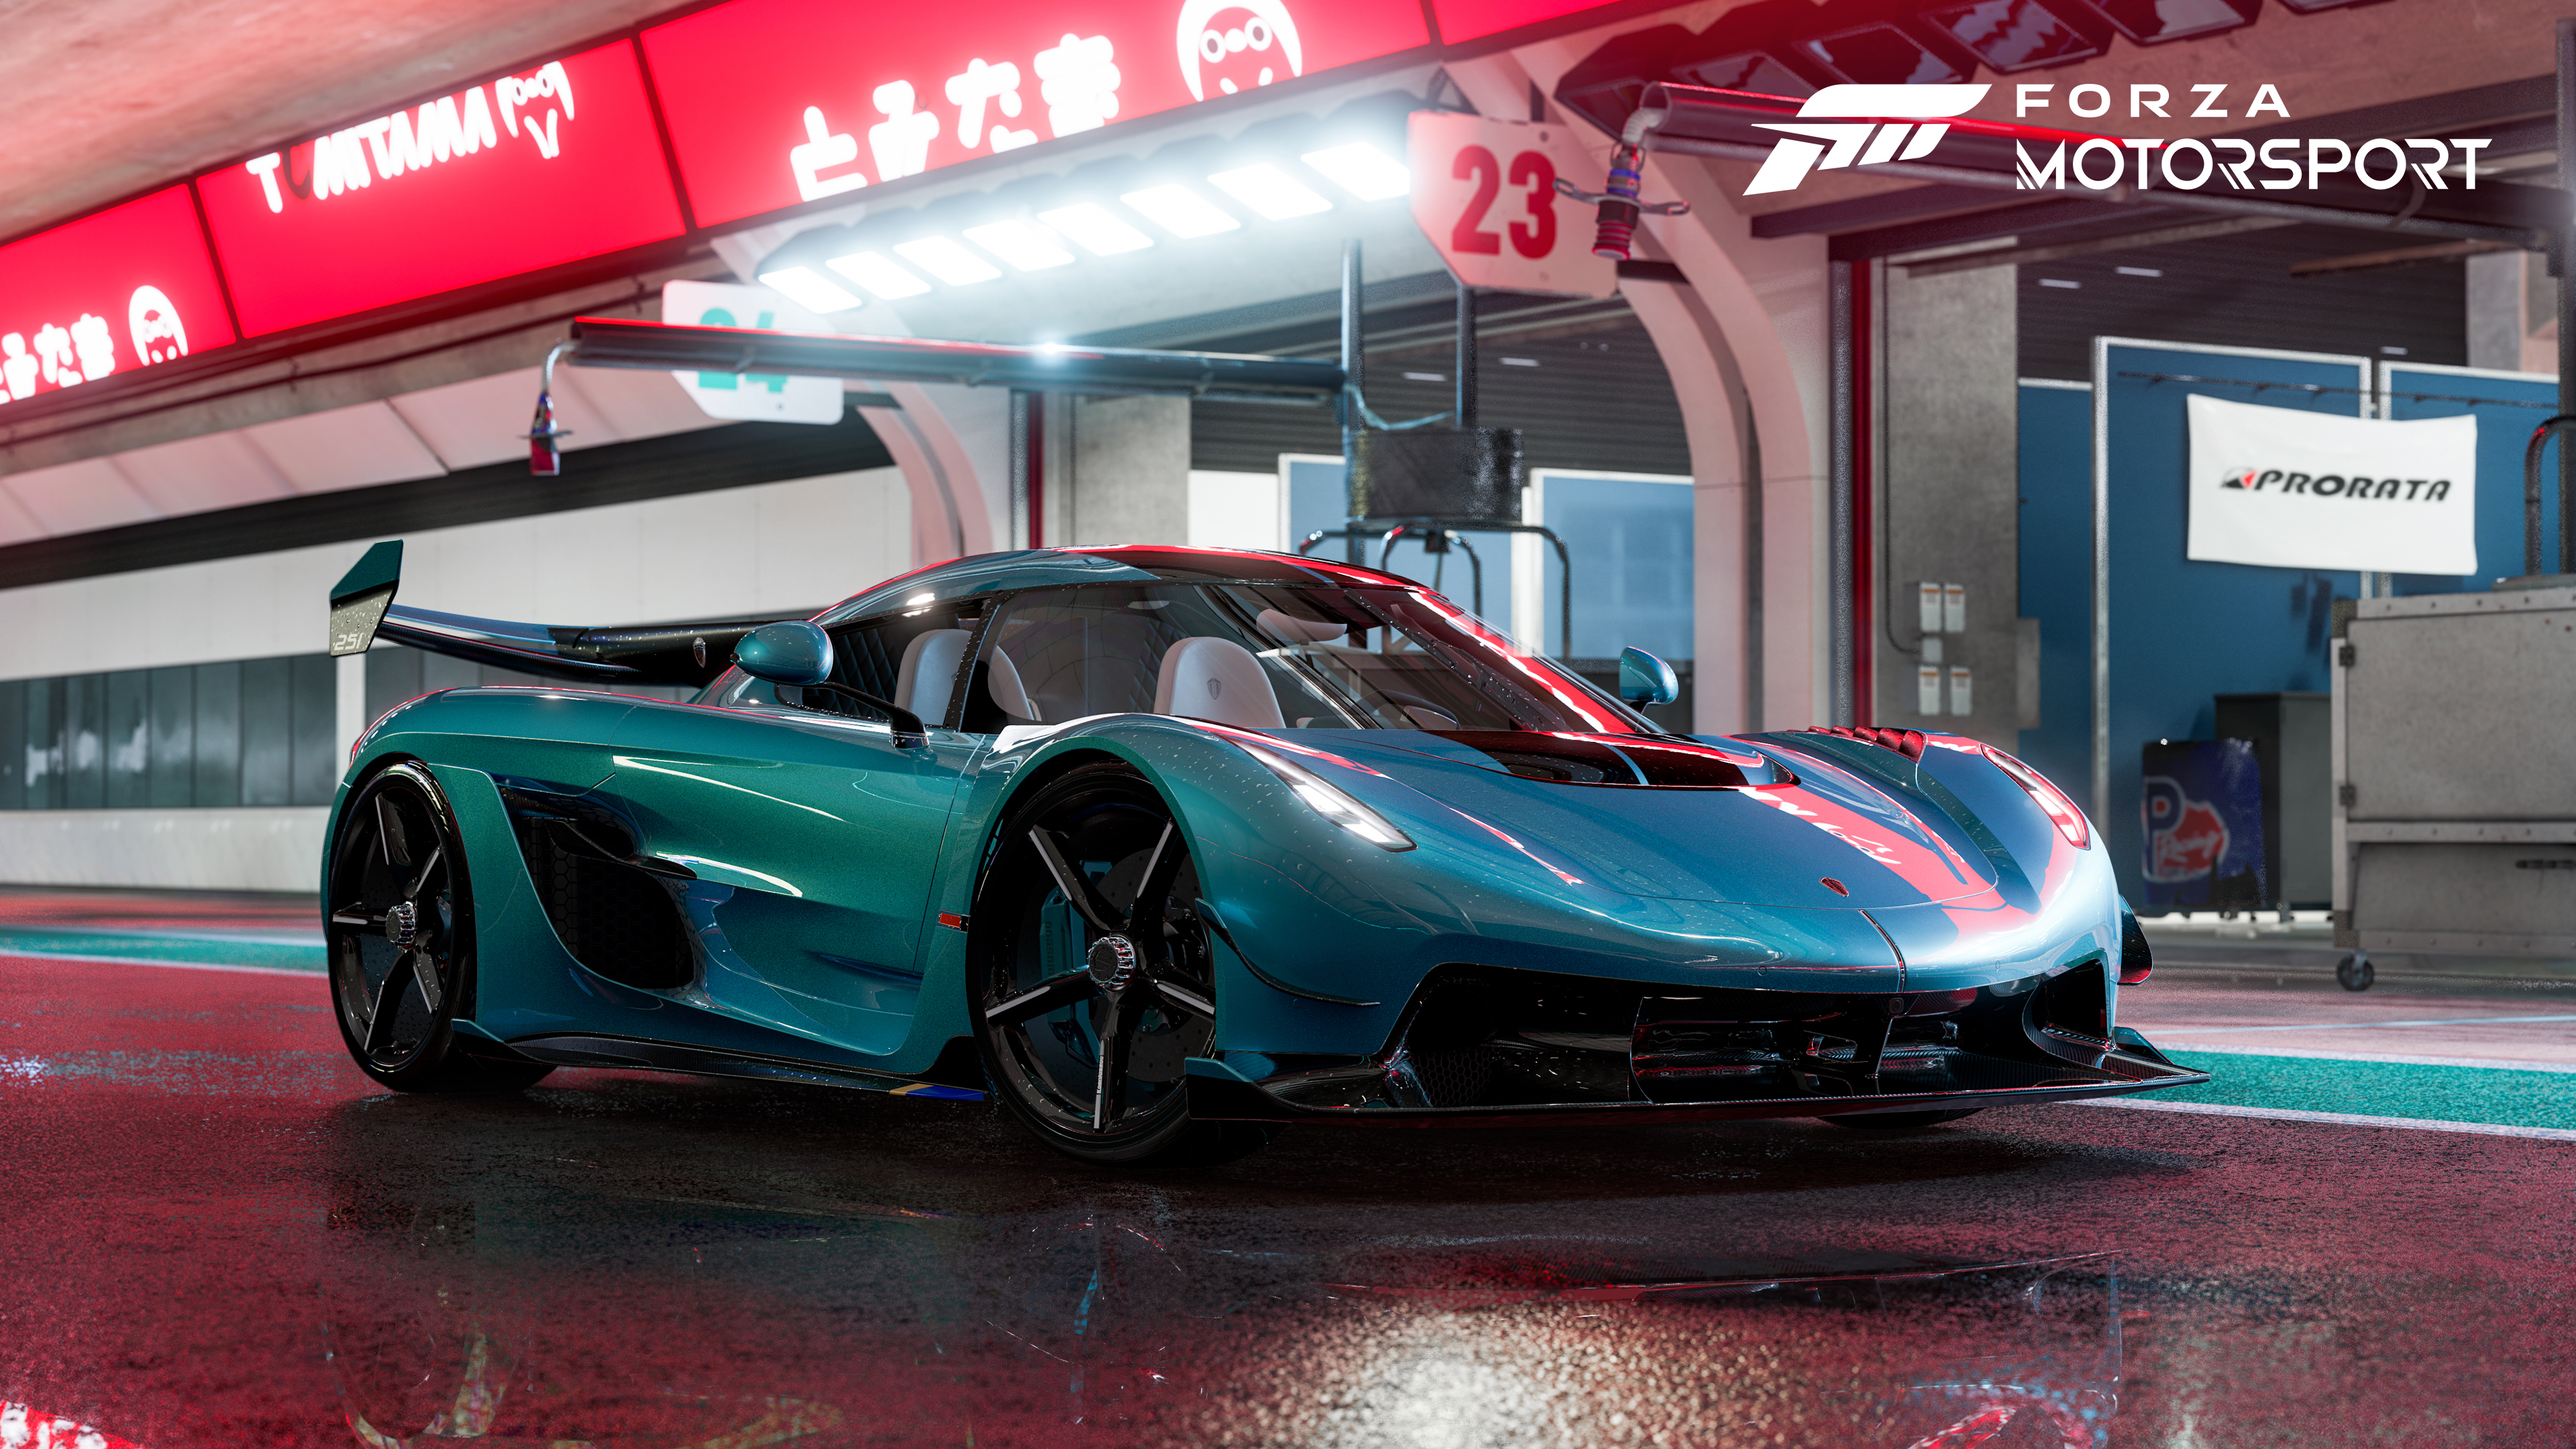 Forza Motorsport trailer released ahead of autumn 2023 launch